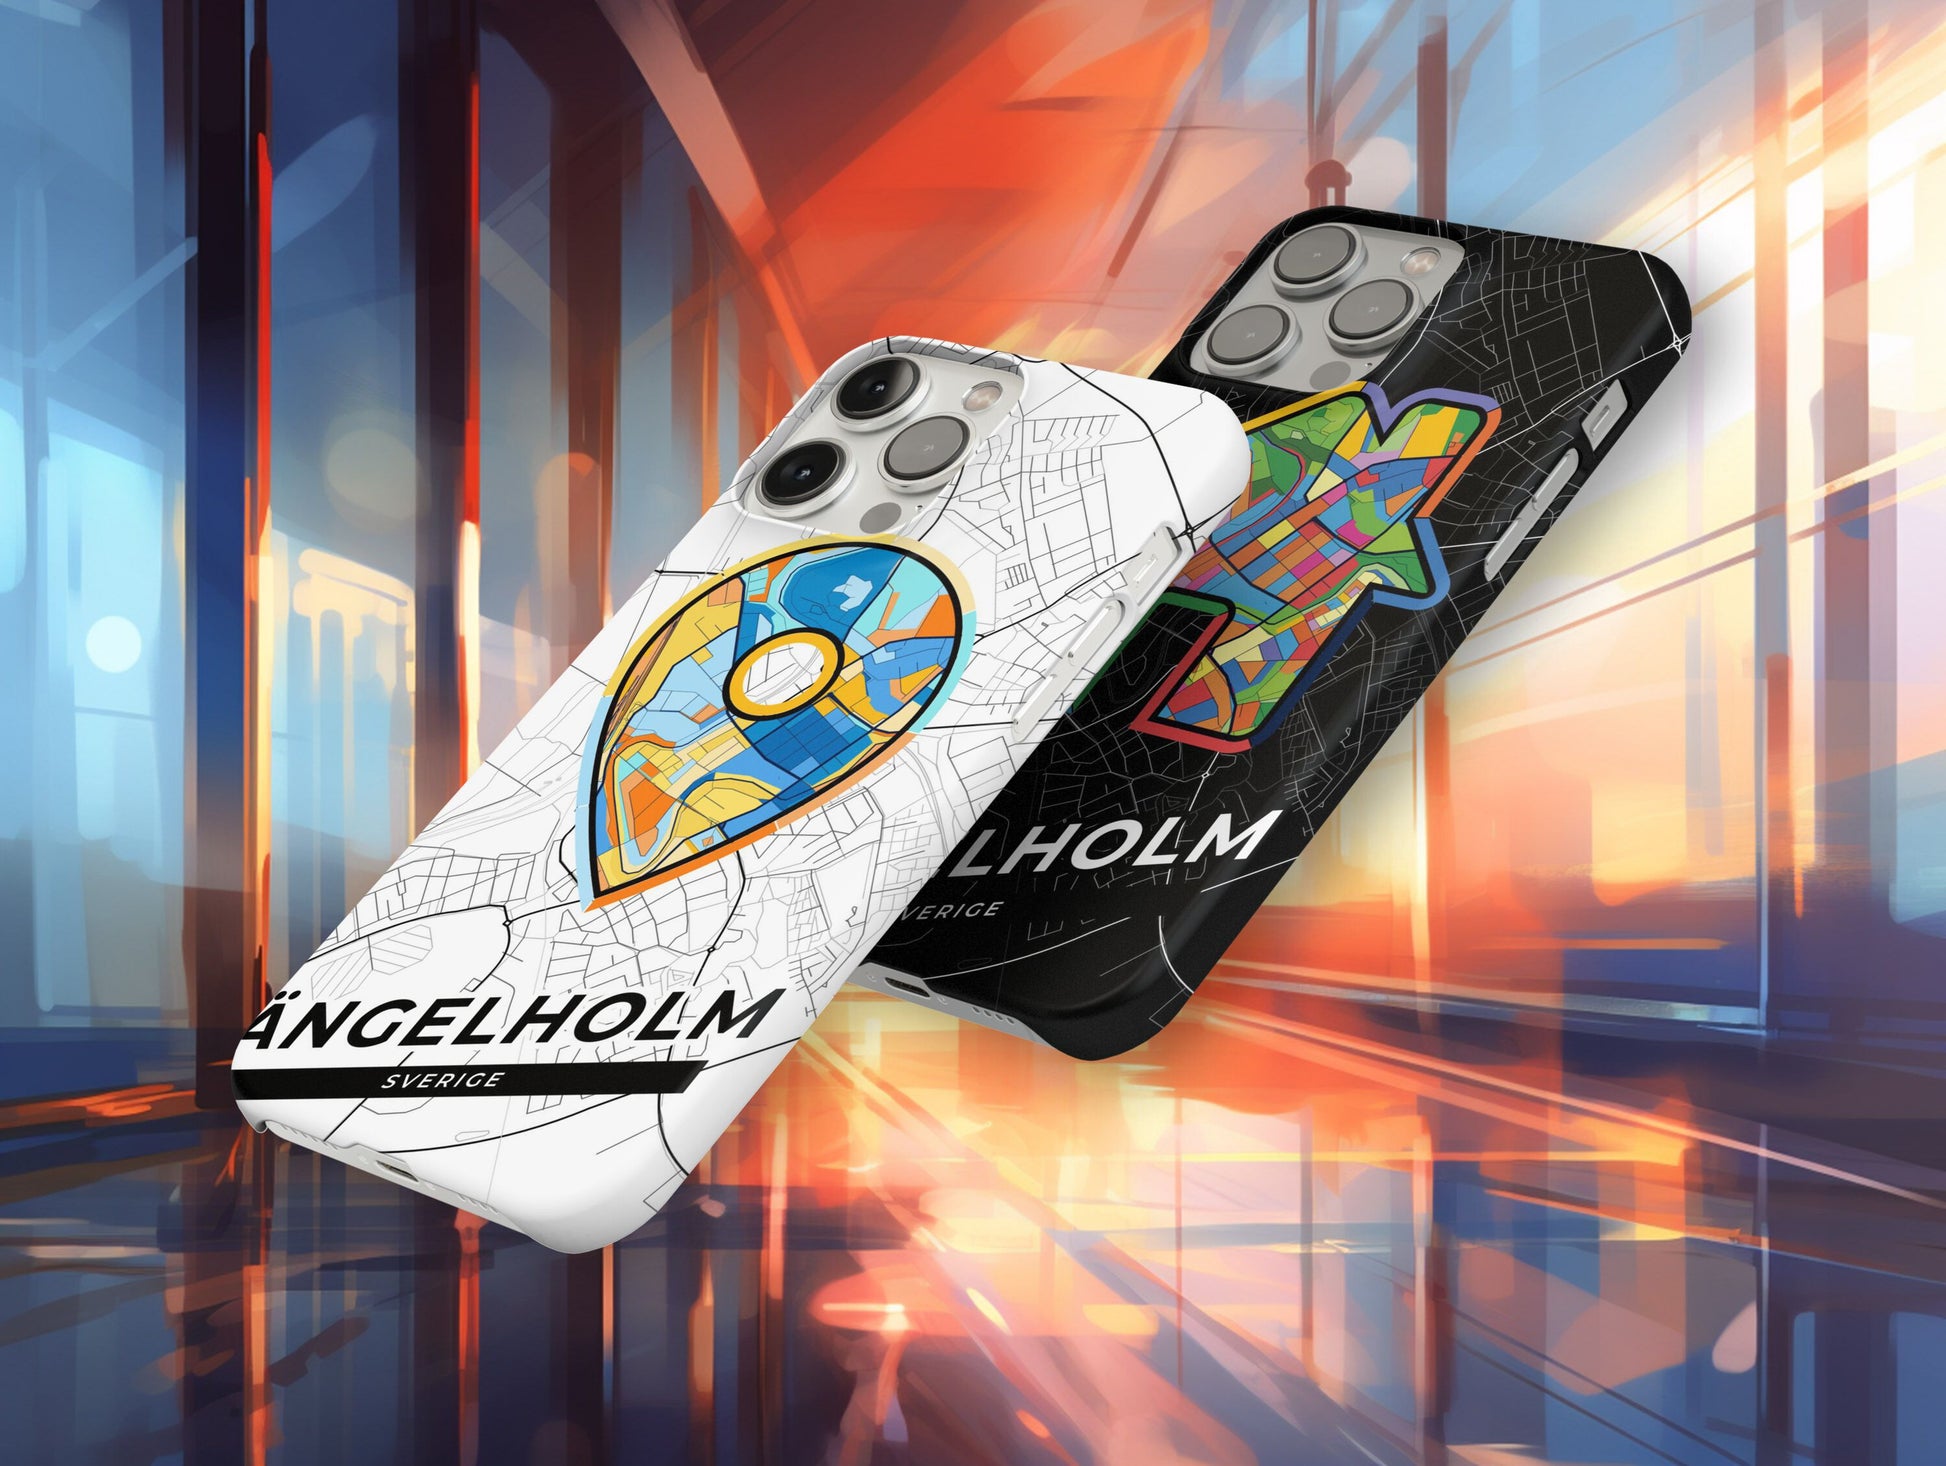 Ängelholm Sweden slim phone case with colorful icon. Birthday, wedding or housewarming gift. Couple match cases.